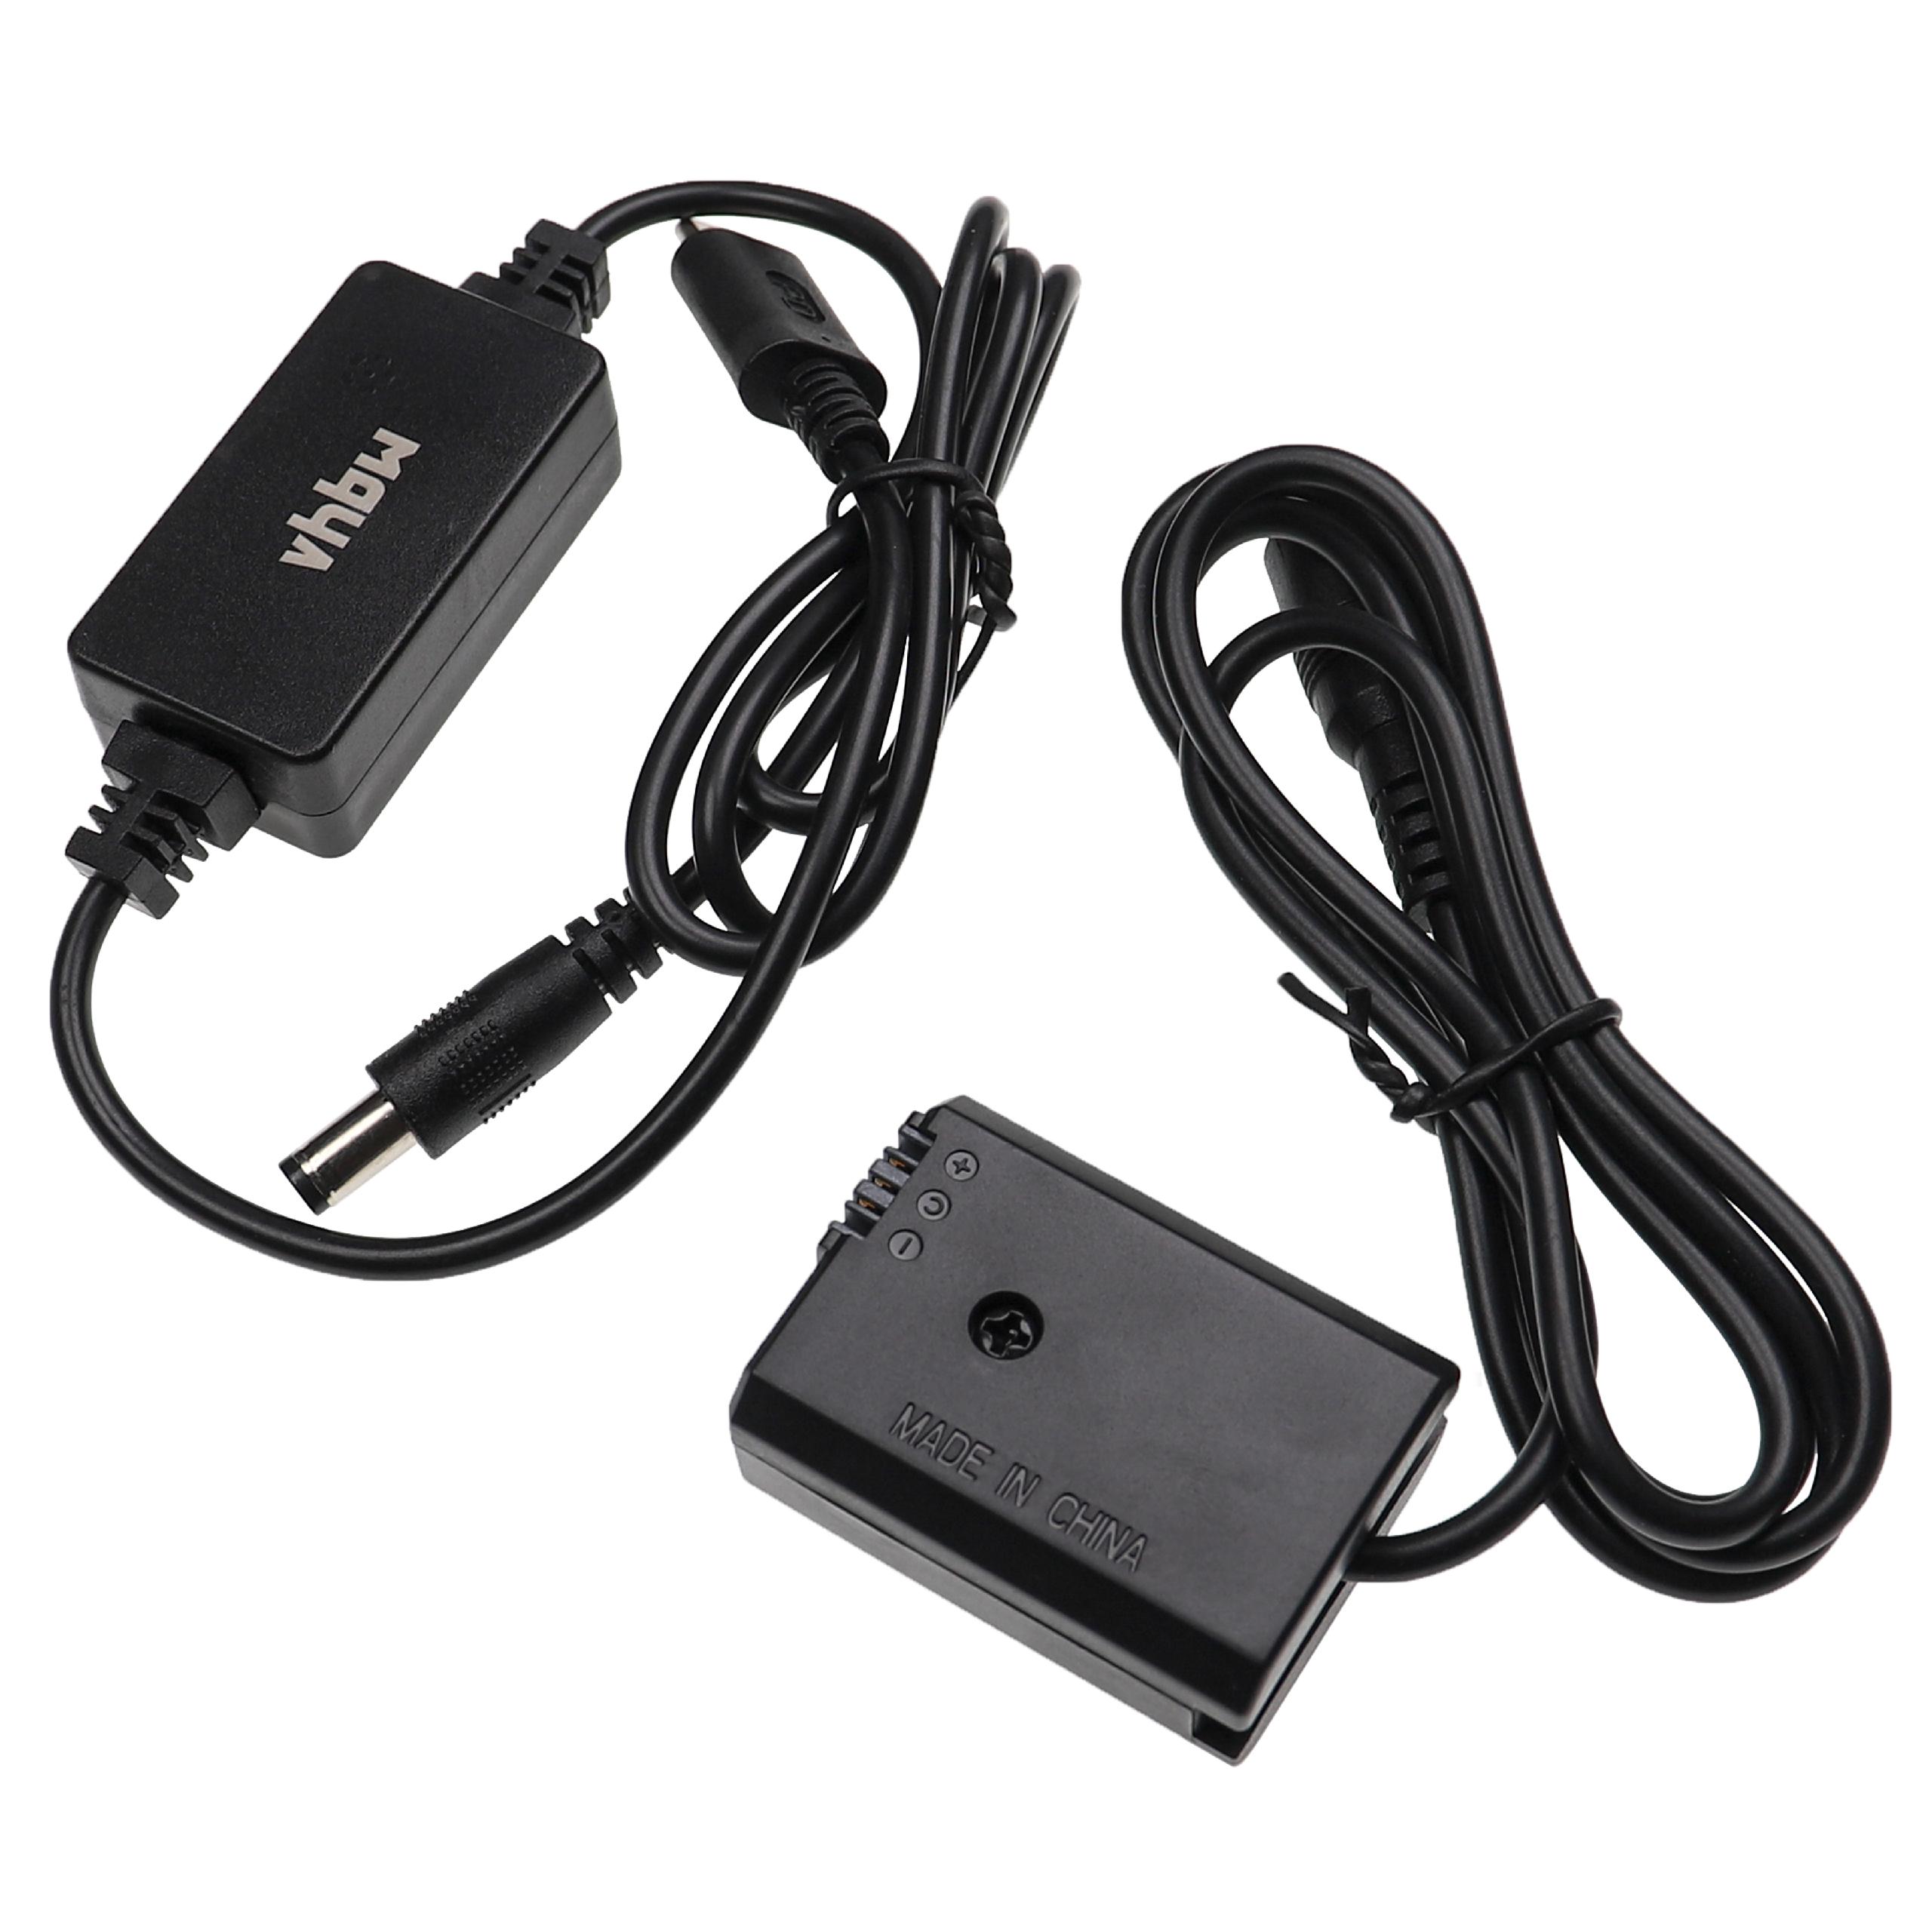 USB Power Supply replaces AC-PW20 for Camera + DC Coupler as Sony NP-FW50 - 2 m, 8.4 V 3.0 A